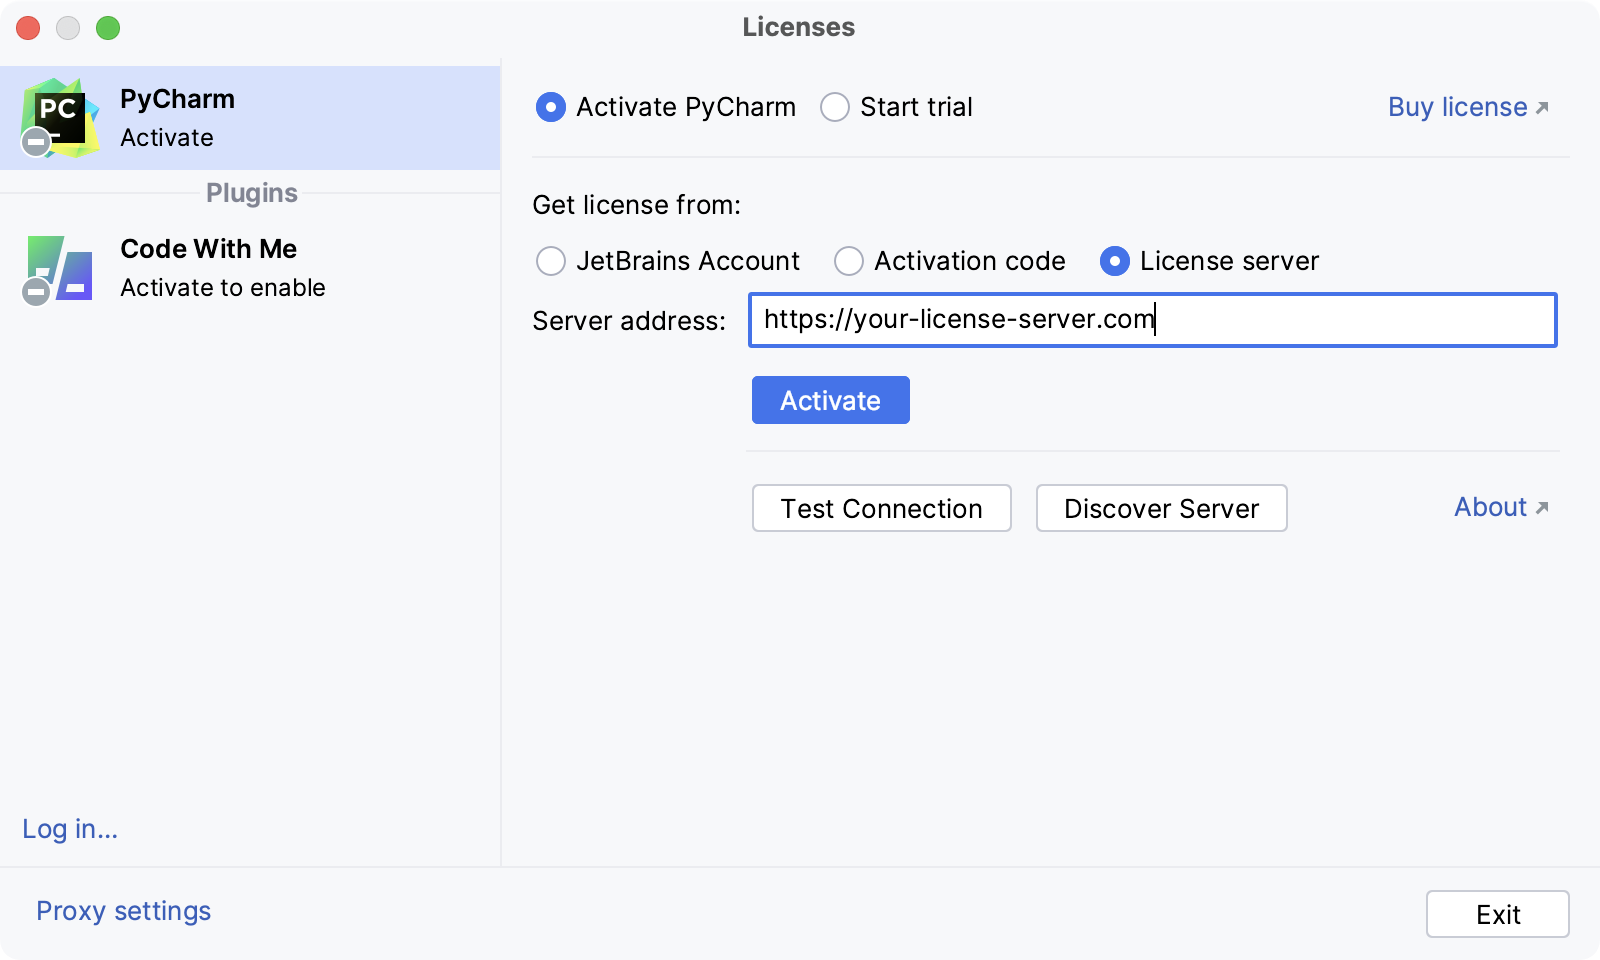 Activate PyCharm license with a license server